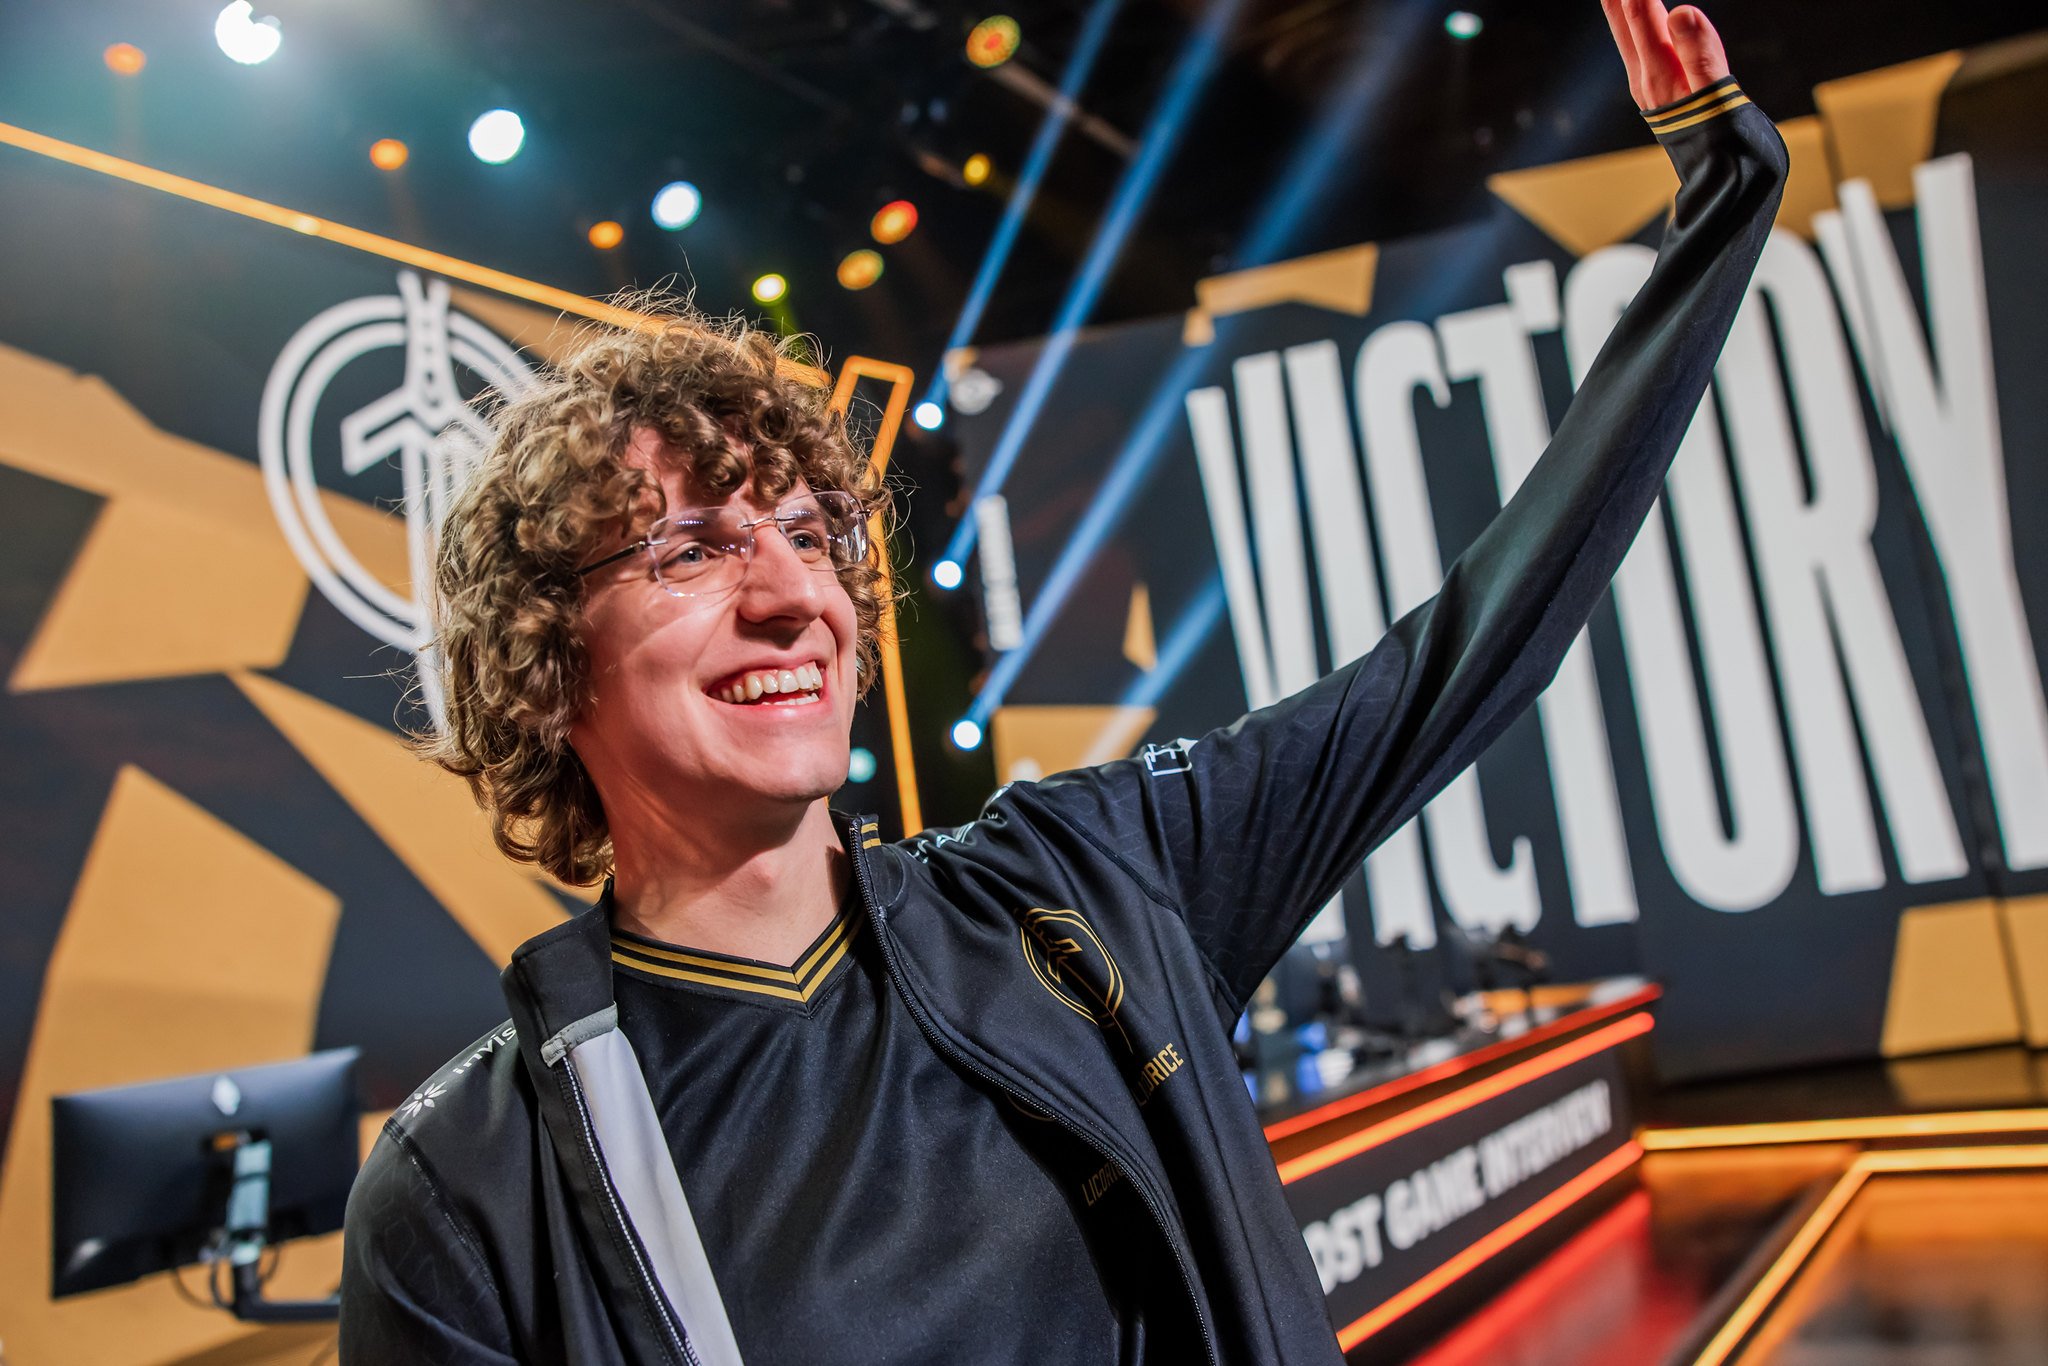 Licorice crowns himself ‘best top laner’ in the LCS after joining Dignitas